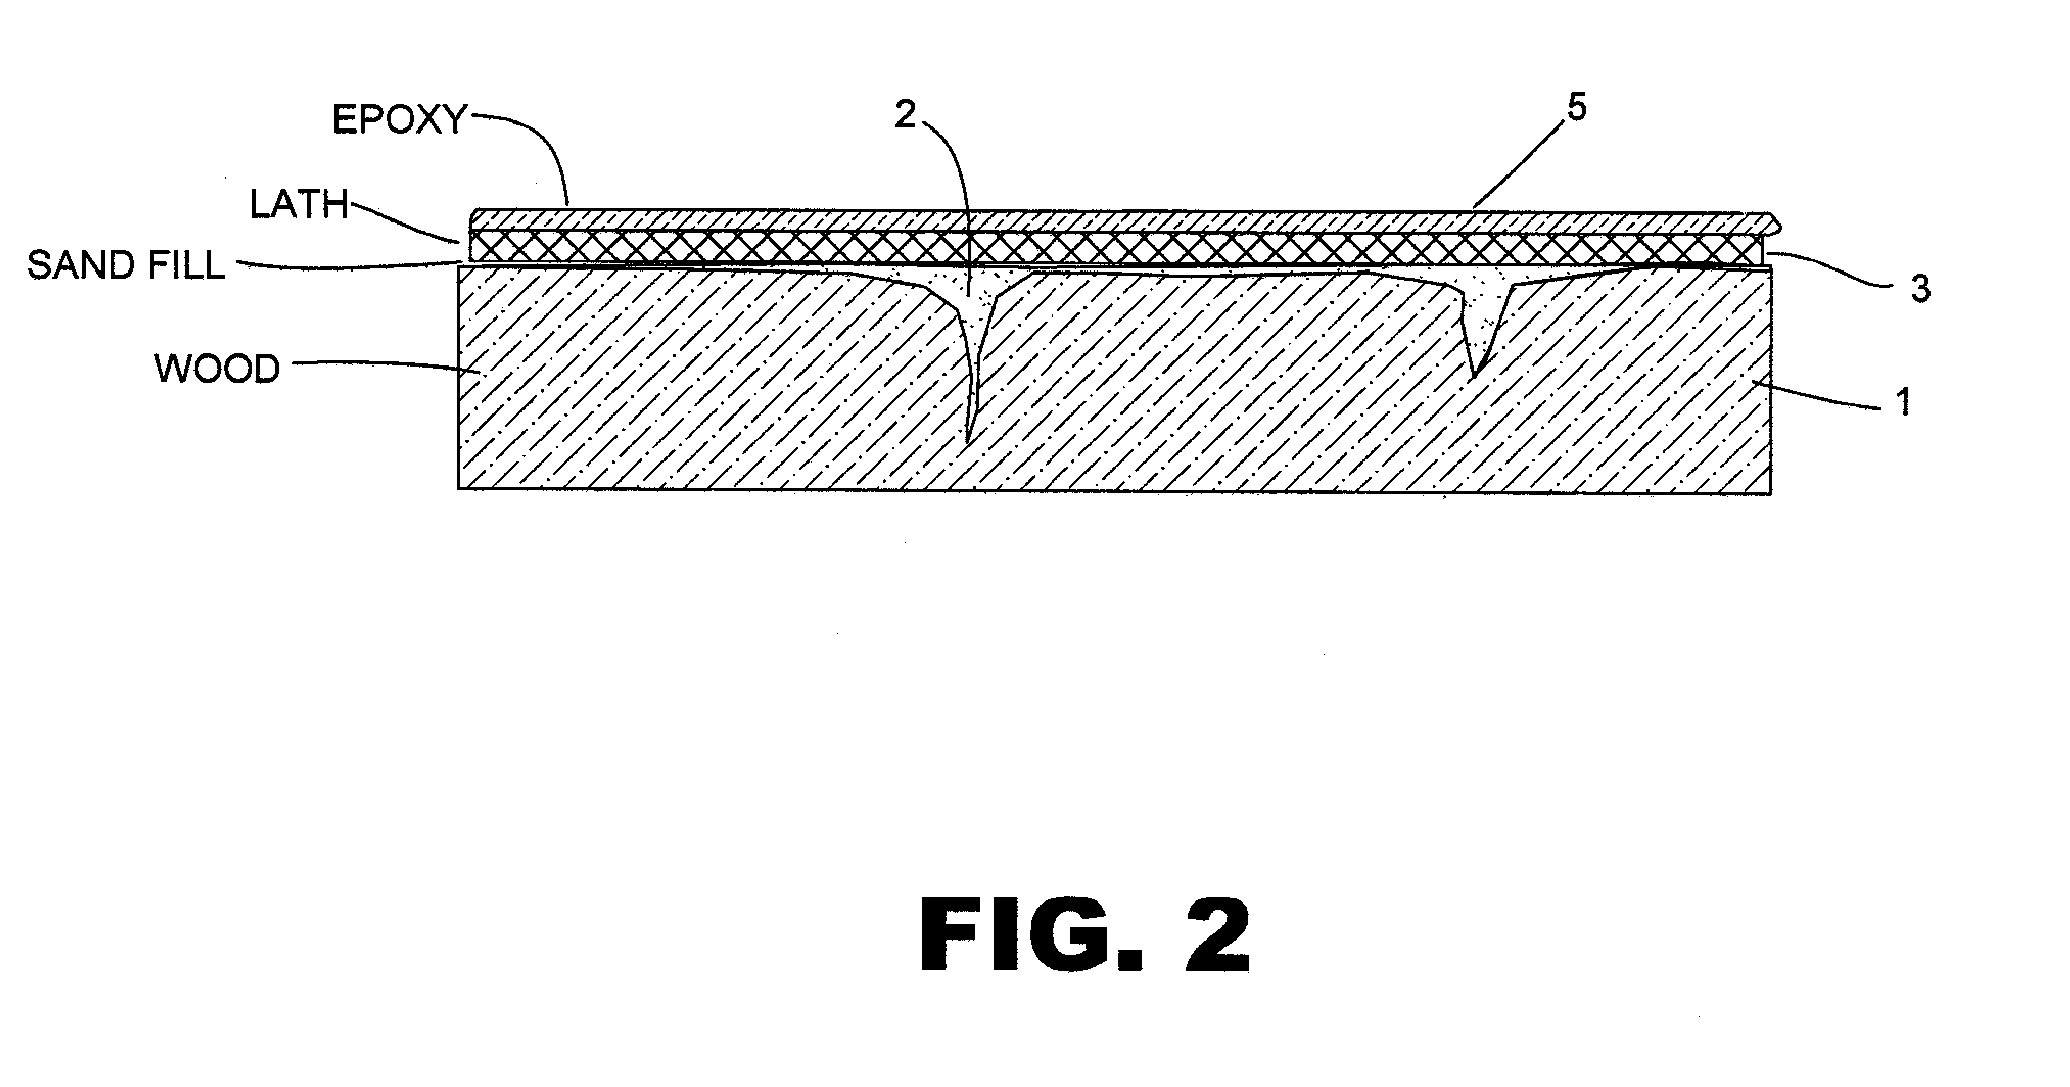 Method and System for Remediating and Covering Wood Floors